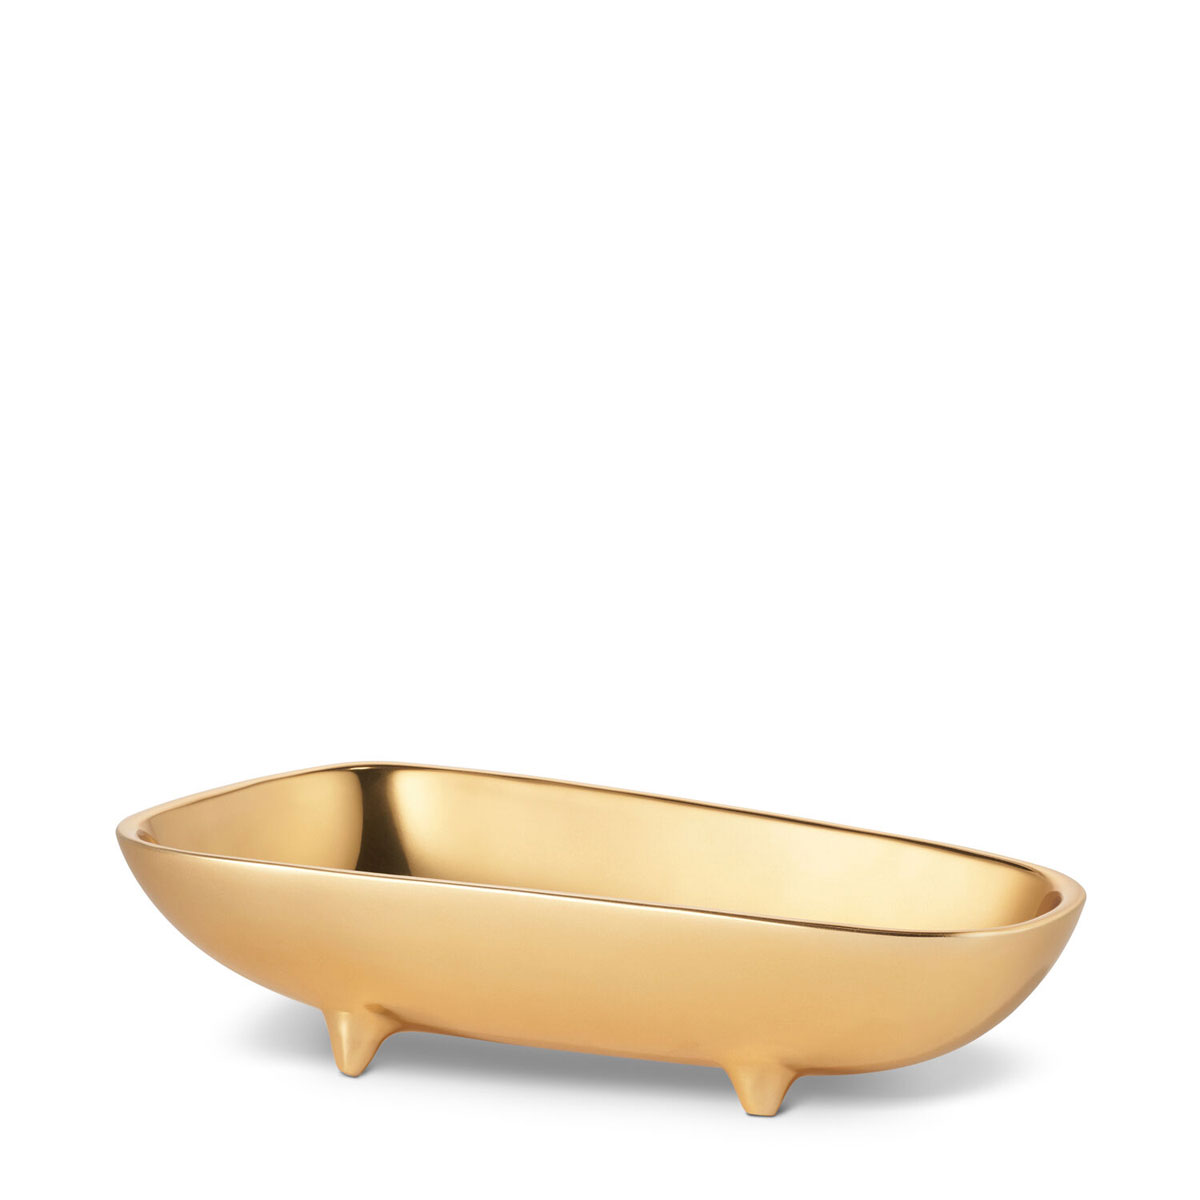 Aerin Valerio Footed Bowl, Gold